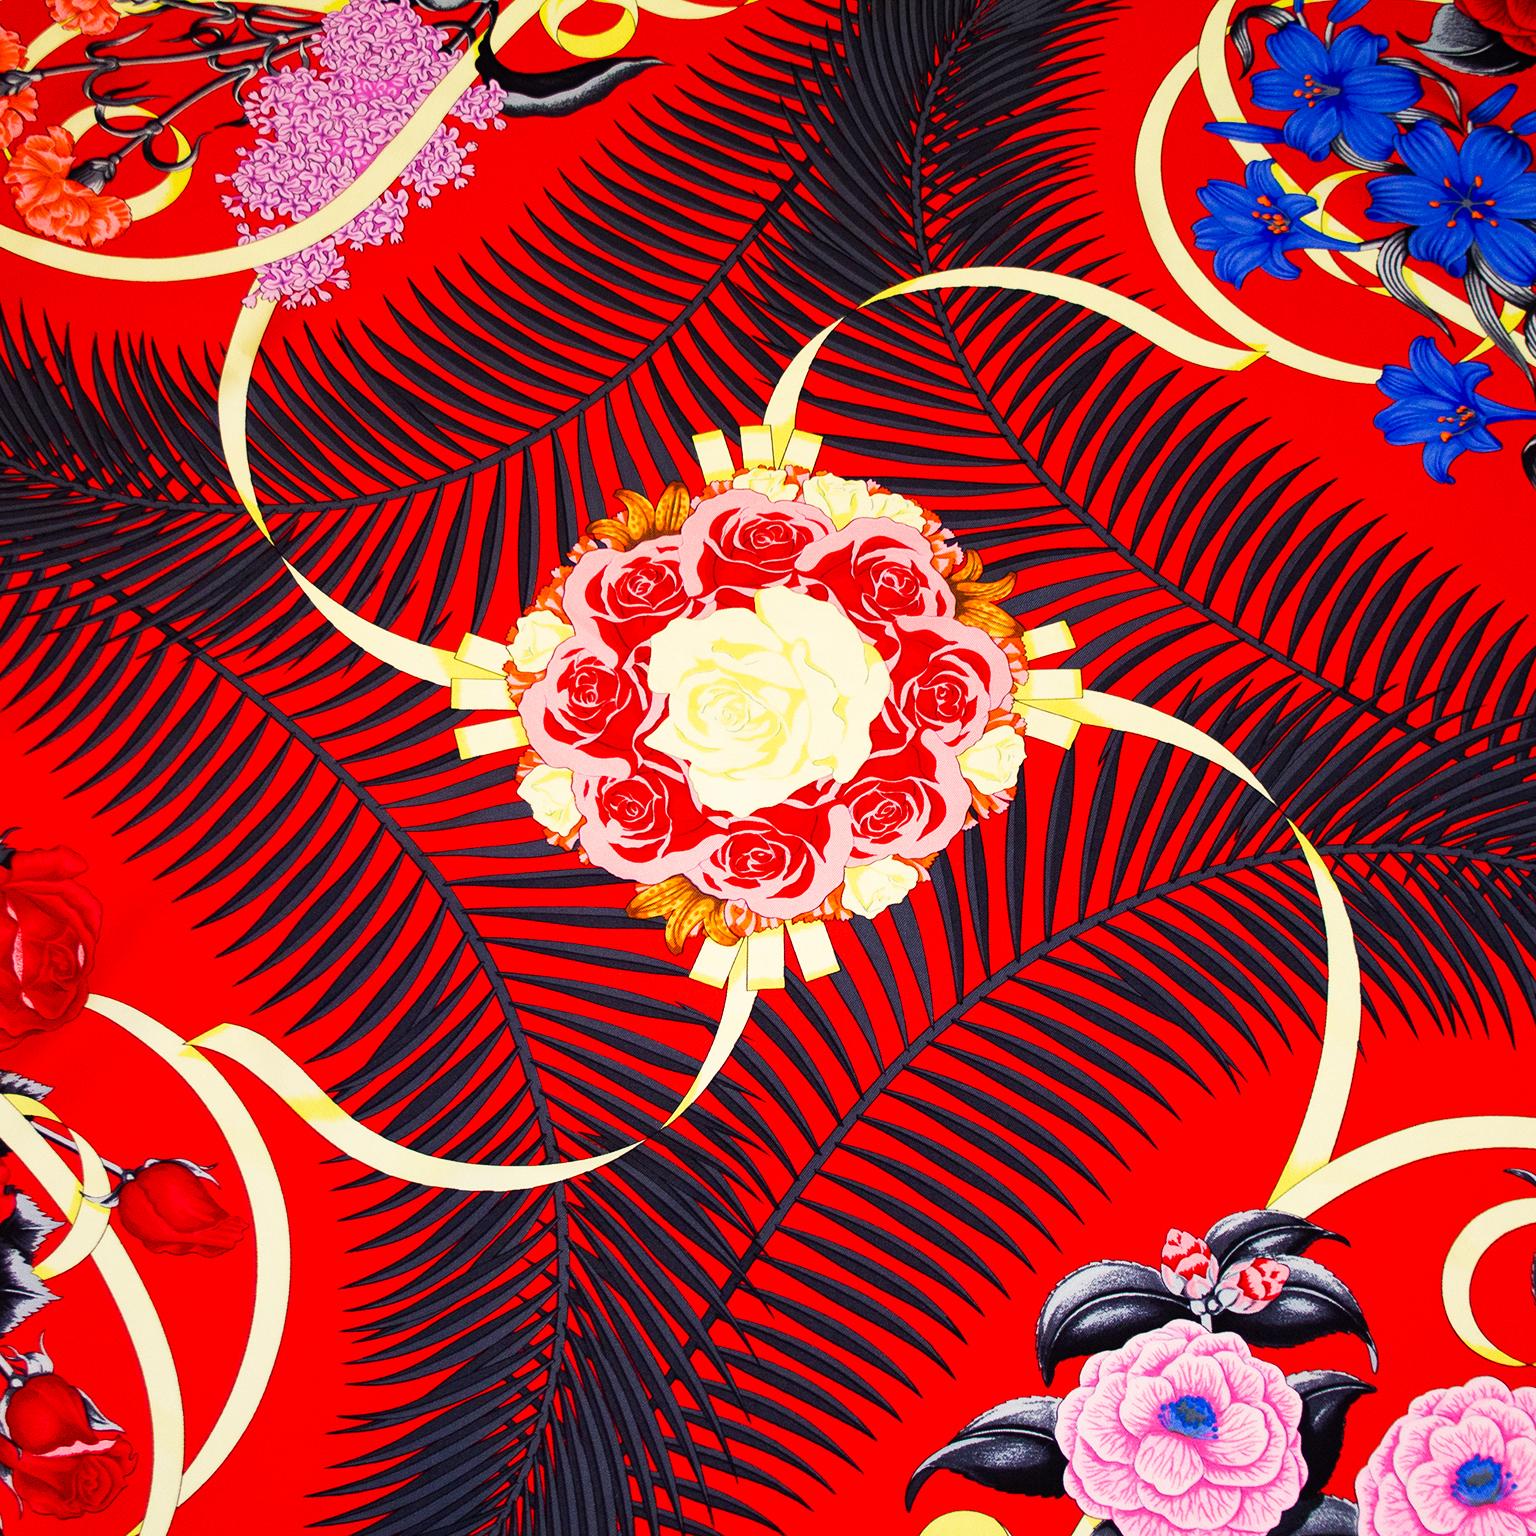 This fabulous vintage Hermès scarf, Fleurs de L'Opera by Julia Abadie was first issued in 1989. Here an original issue with a bold and dramatic red background featuring black, blue, pink and yellow floral details. A must have for any opera lover.